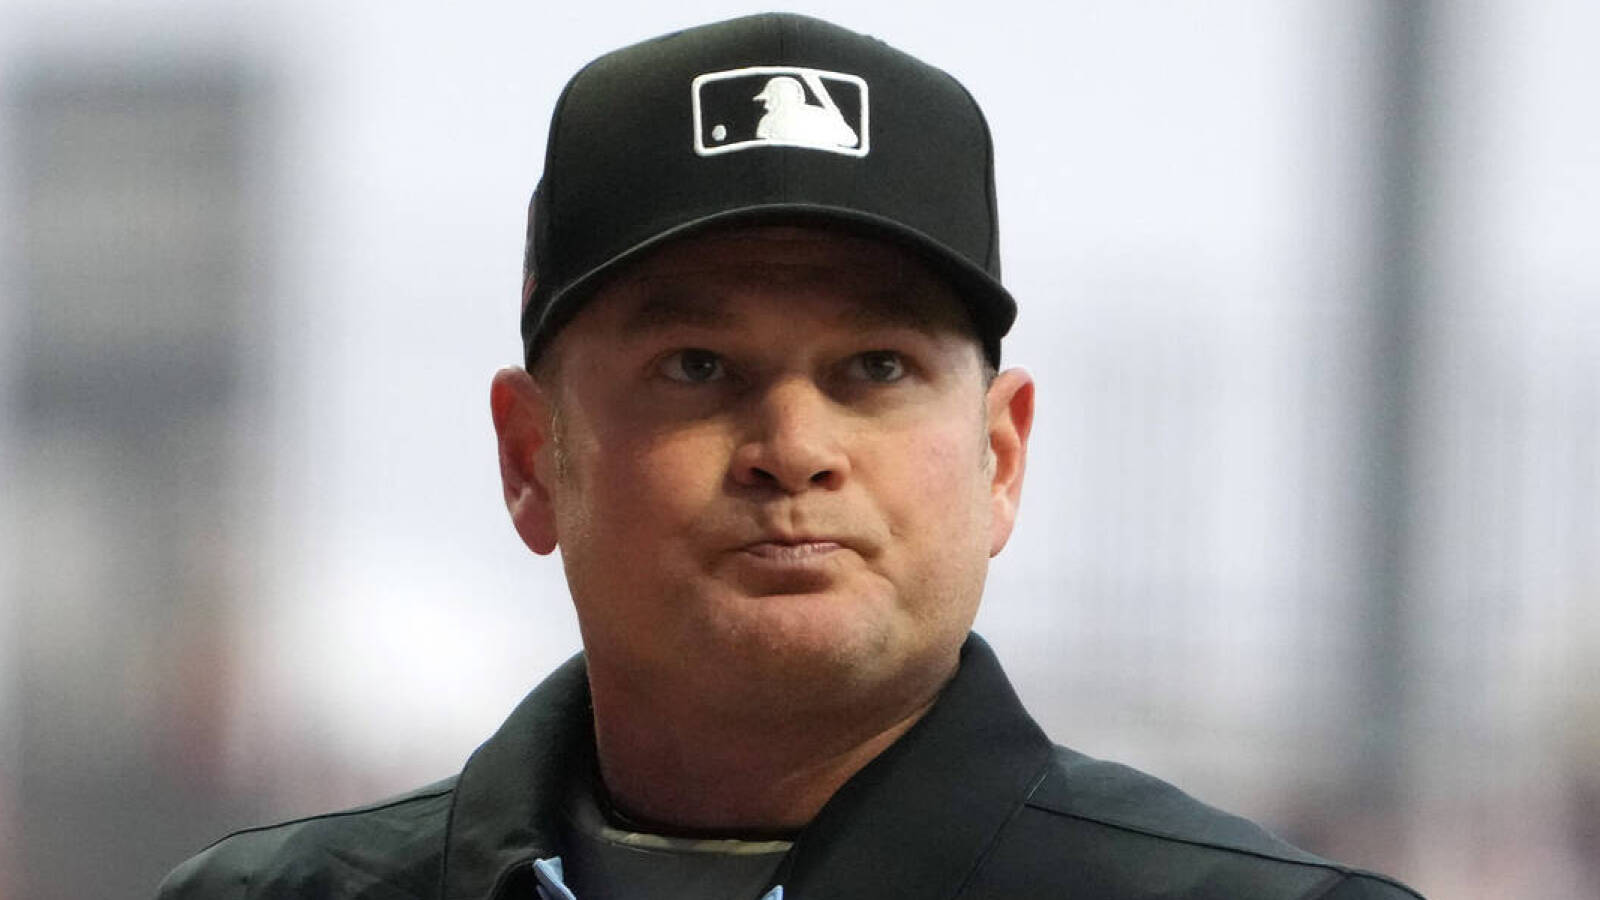 Bad players get relegated to the minors. How about bad umpires?